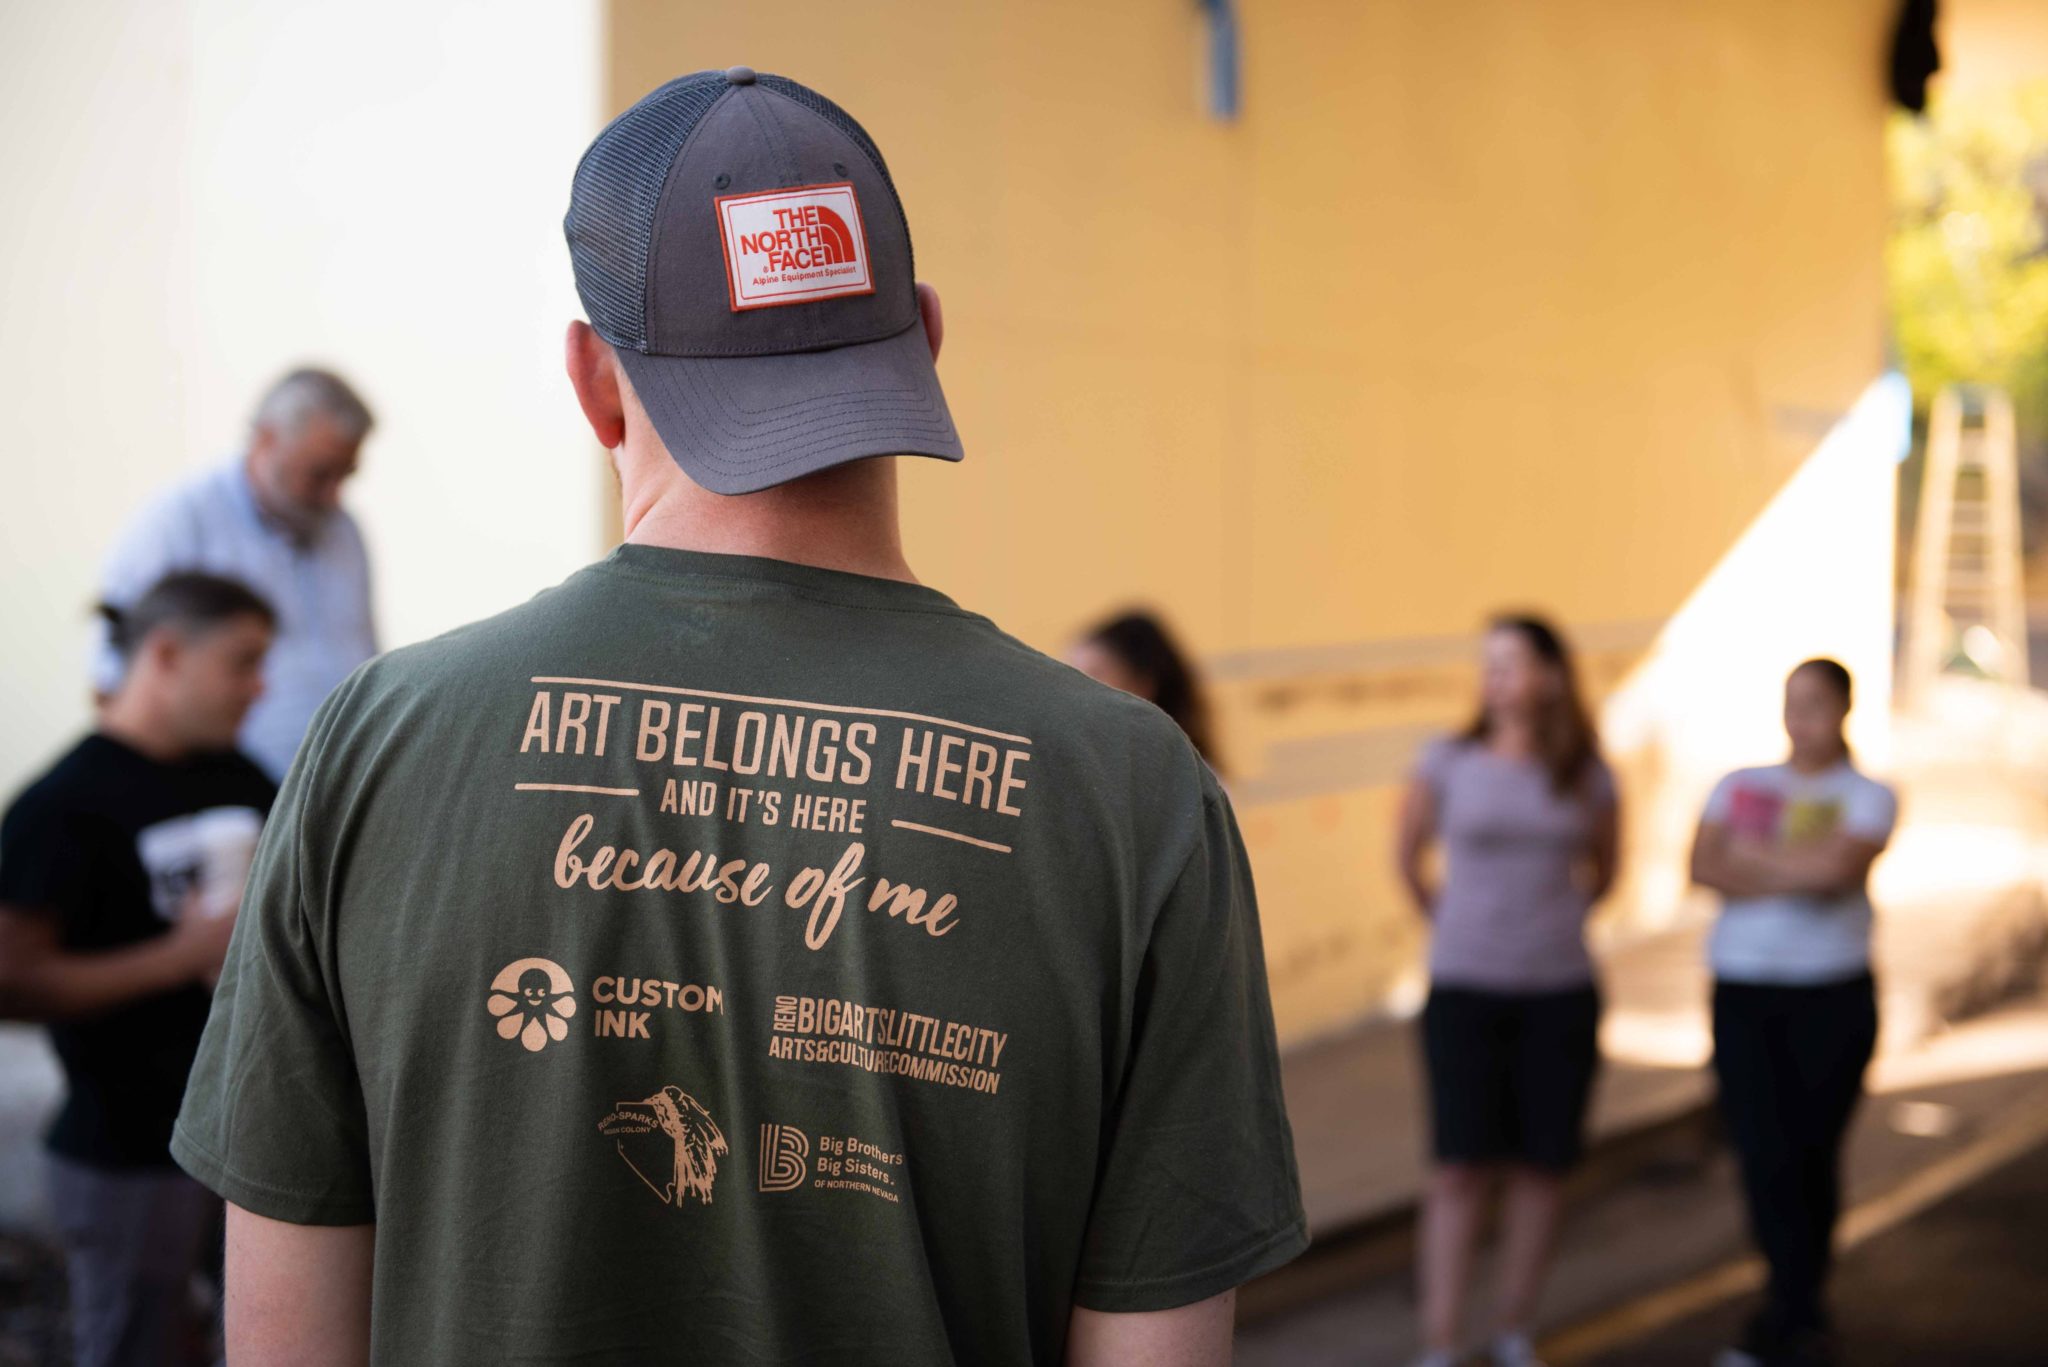 A man from the back wearing a custom t-shirt hat reads "Art Belongs Here and it's here because of me."